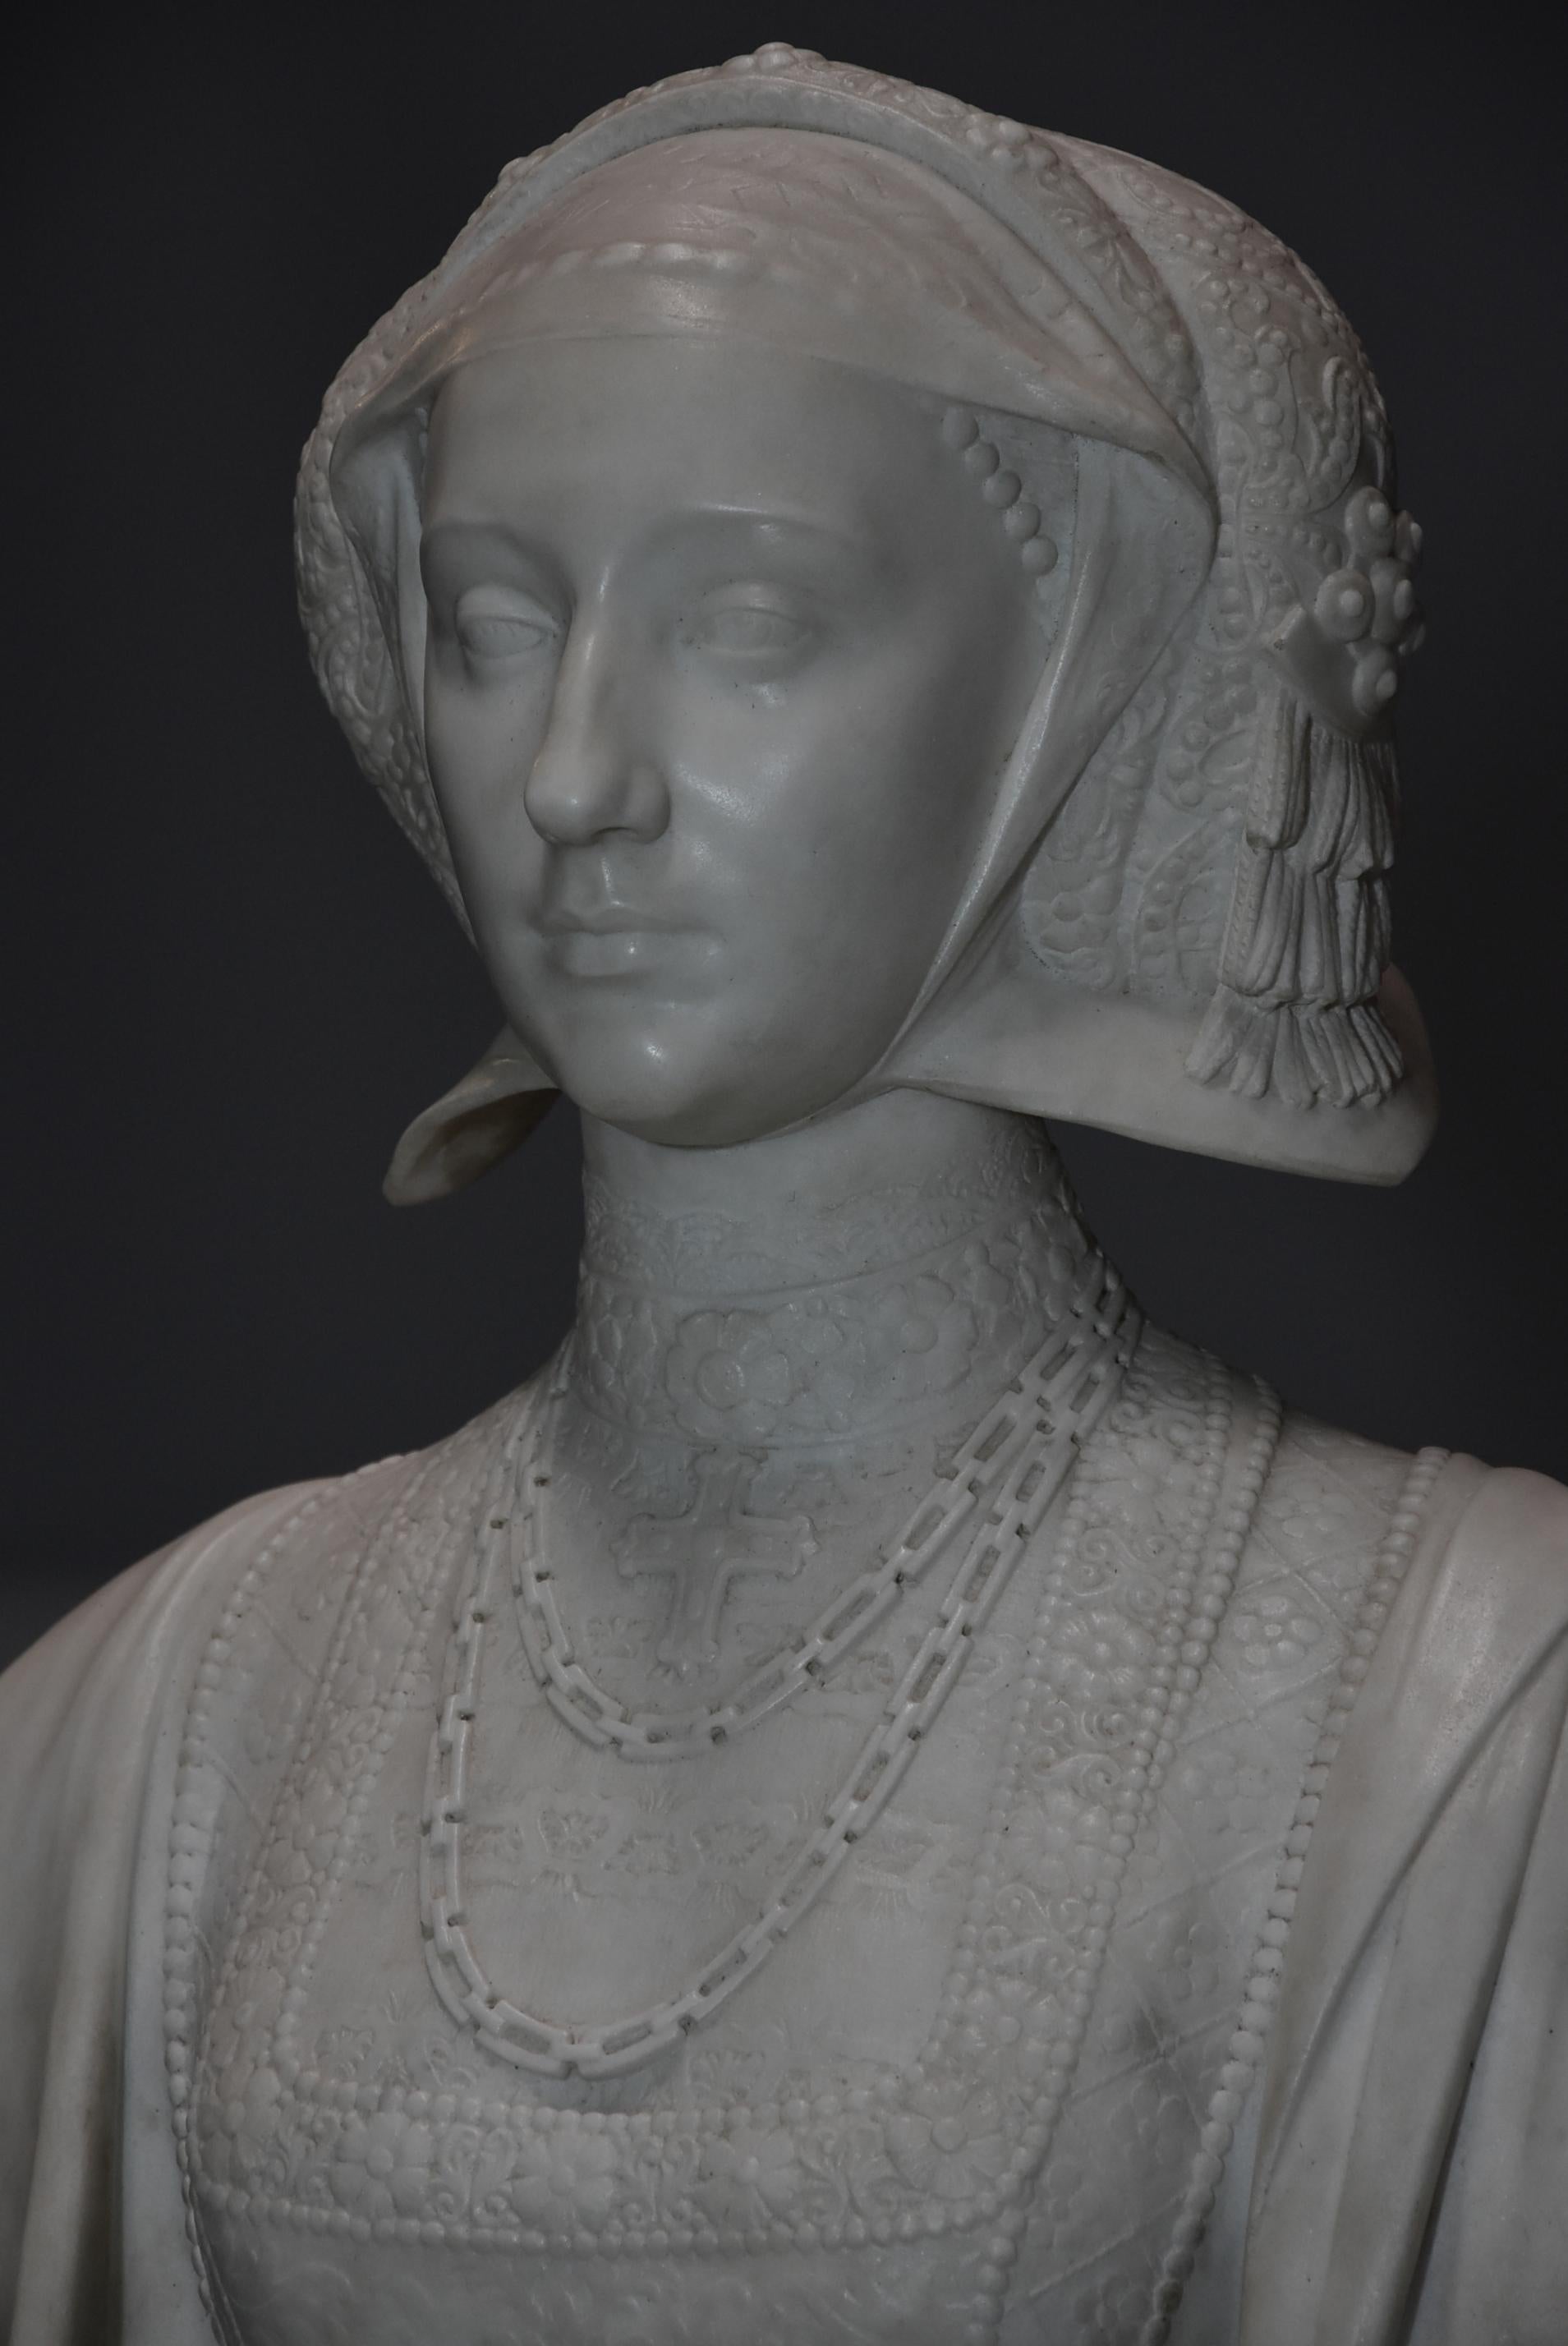 A finely carved early 19th century (circa 1820) lifesize Carrara marble figure of Anne of Cleves (1515-1557) inscribed ‘Anne de Cleve Reine’, possibly Italian.

The marble sculpture has a superbly carved face of Anne of Cleves wearing a lace hood